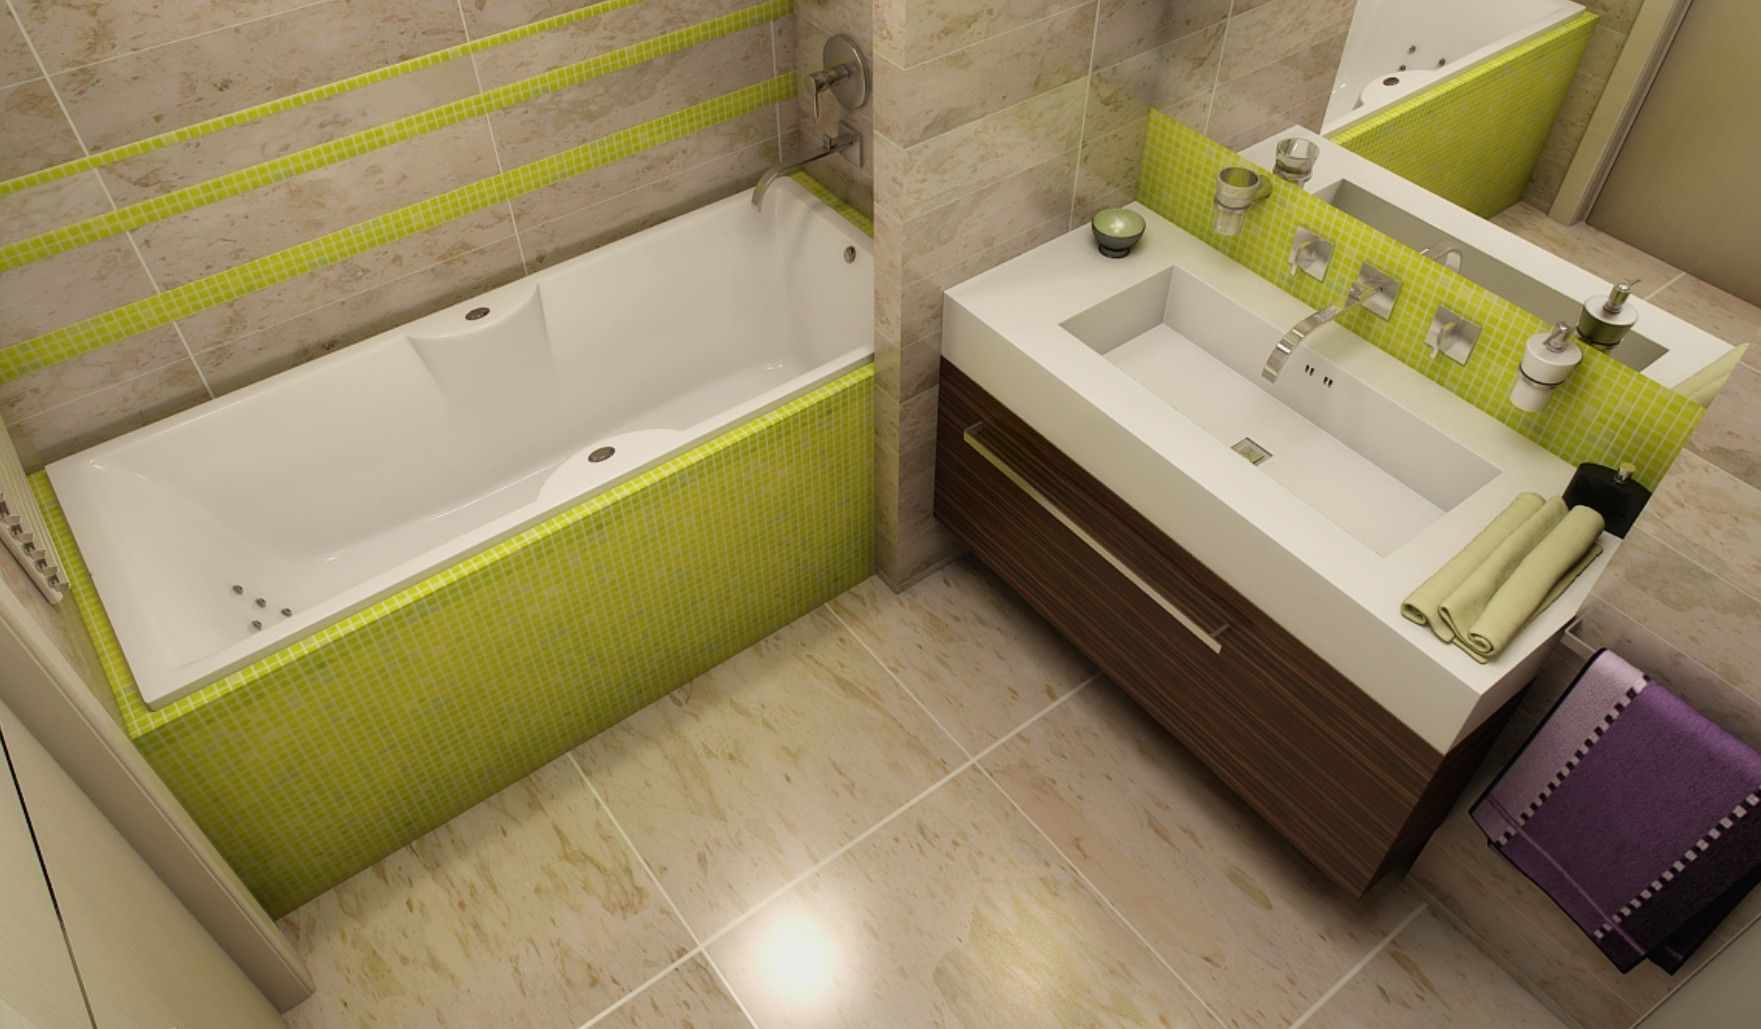 version of the unusual design of the bathroom with tiling